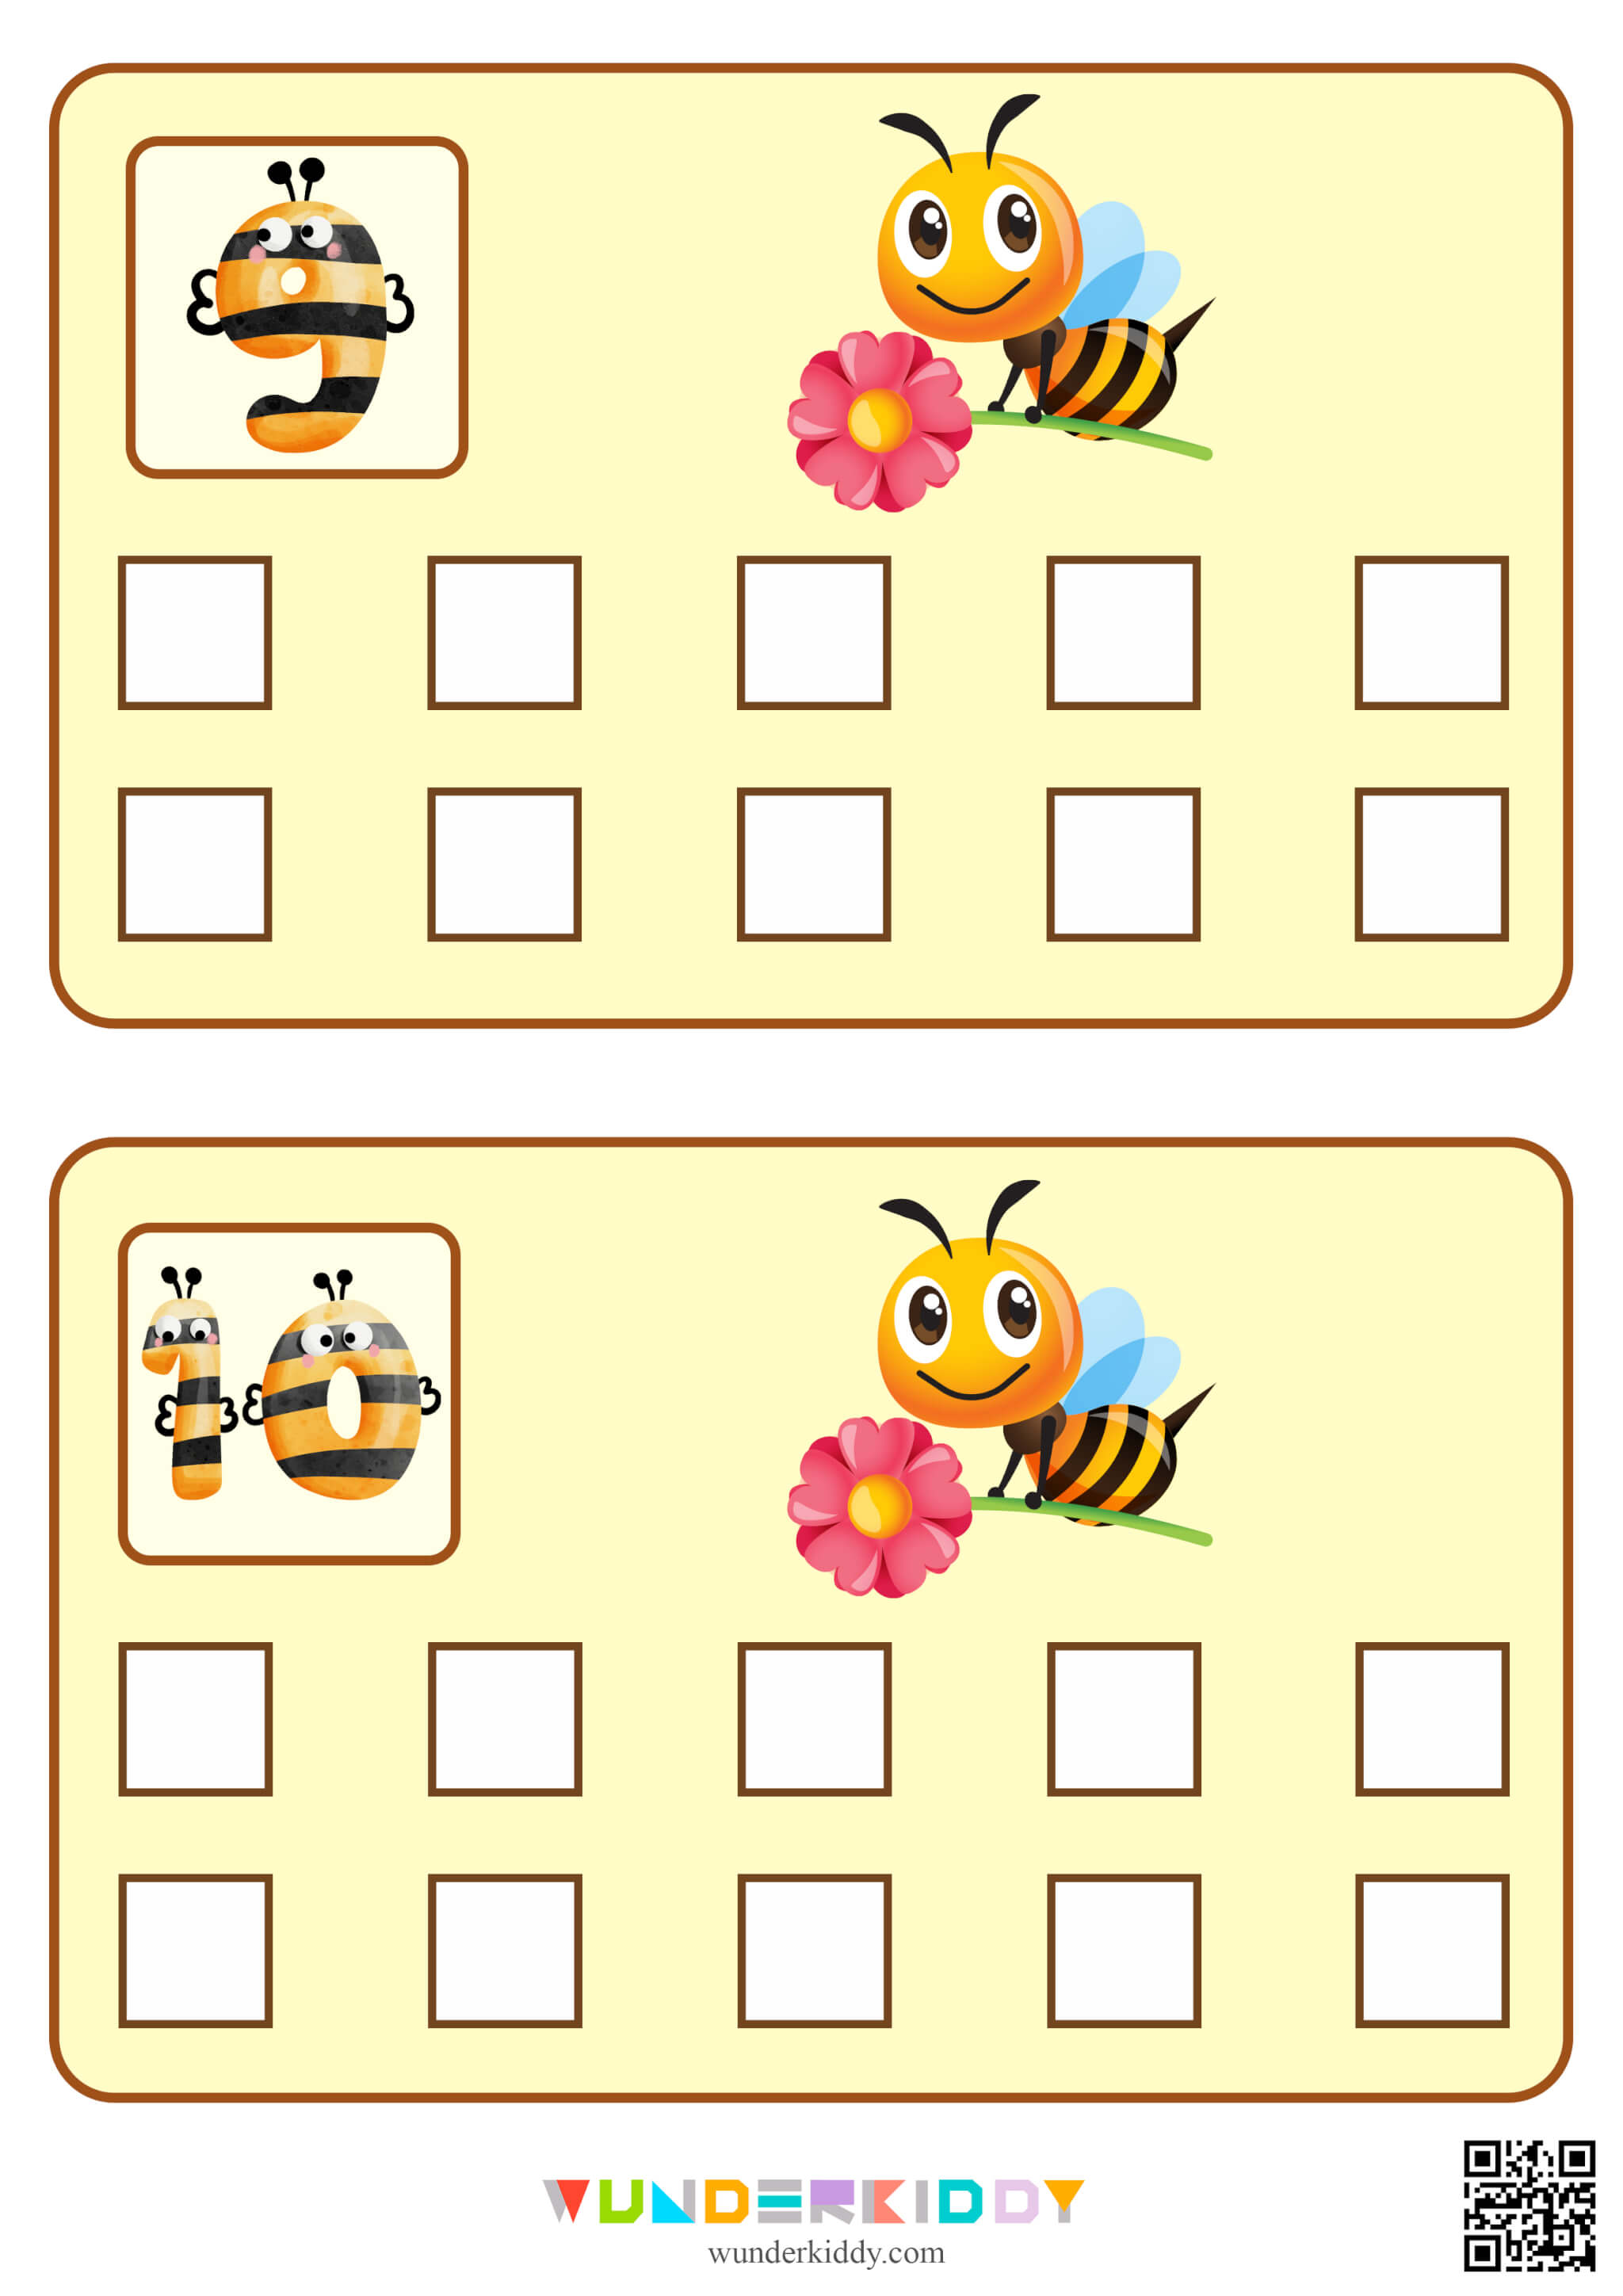 Worksheets «Counting bees» - Image 6